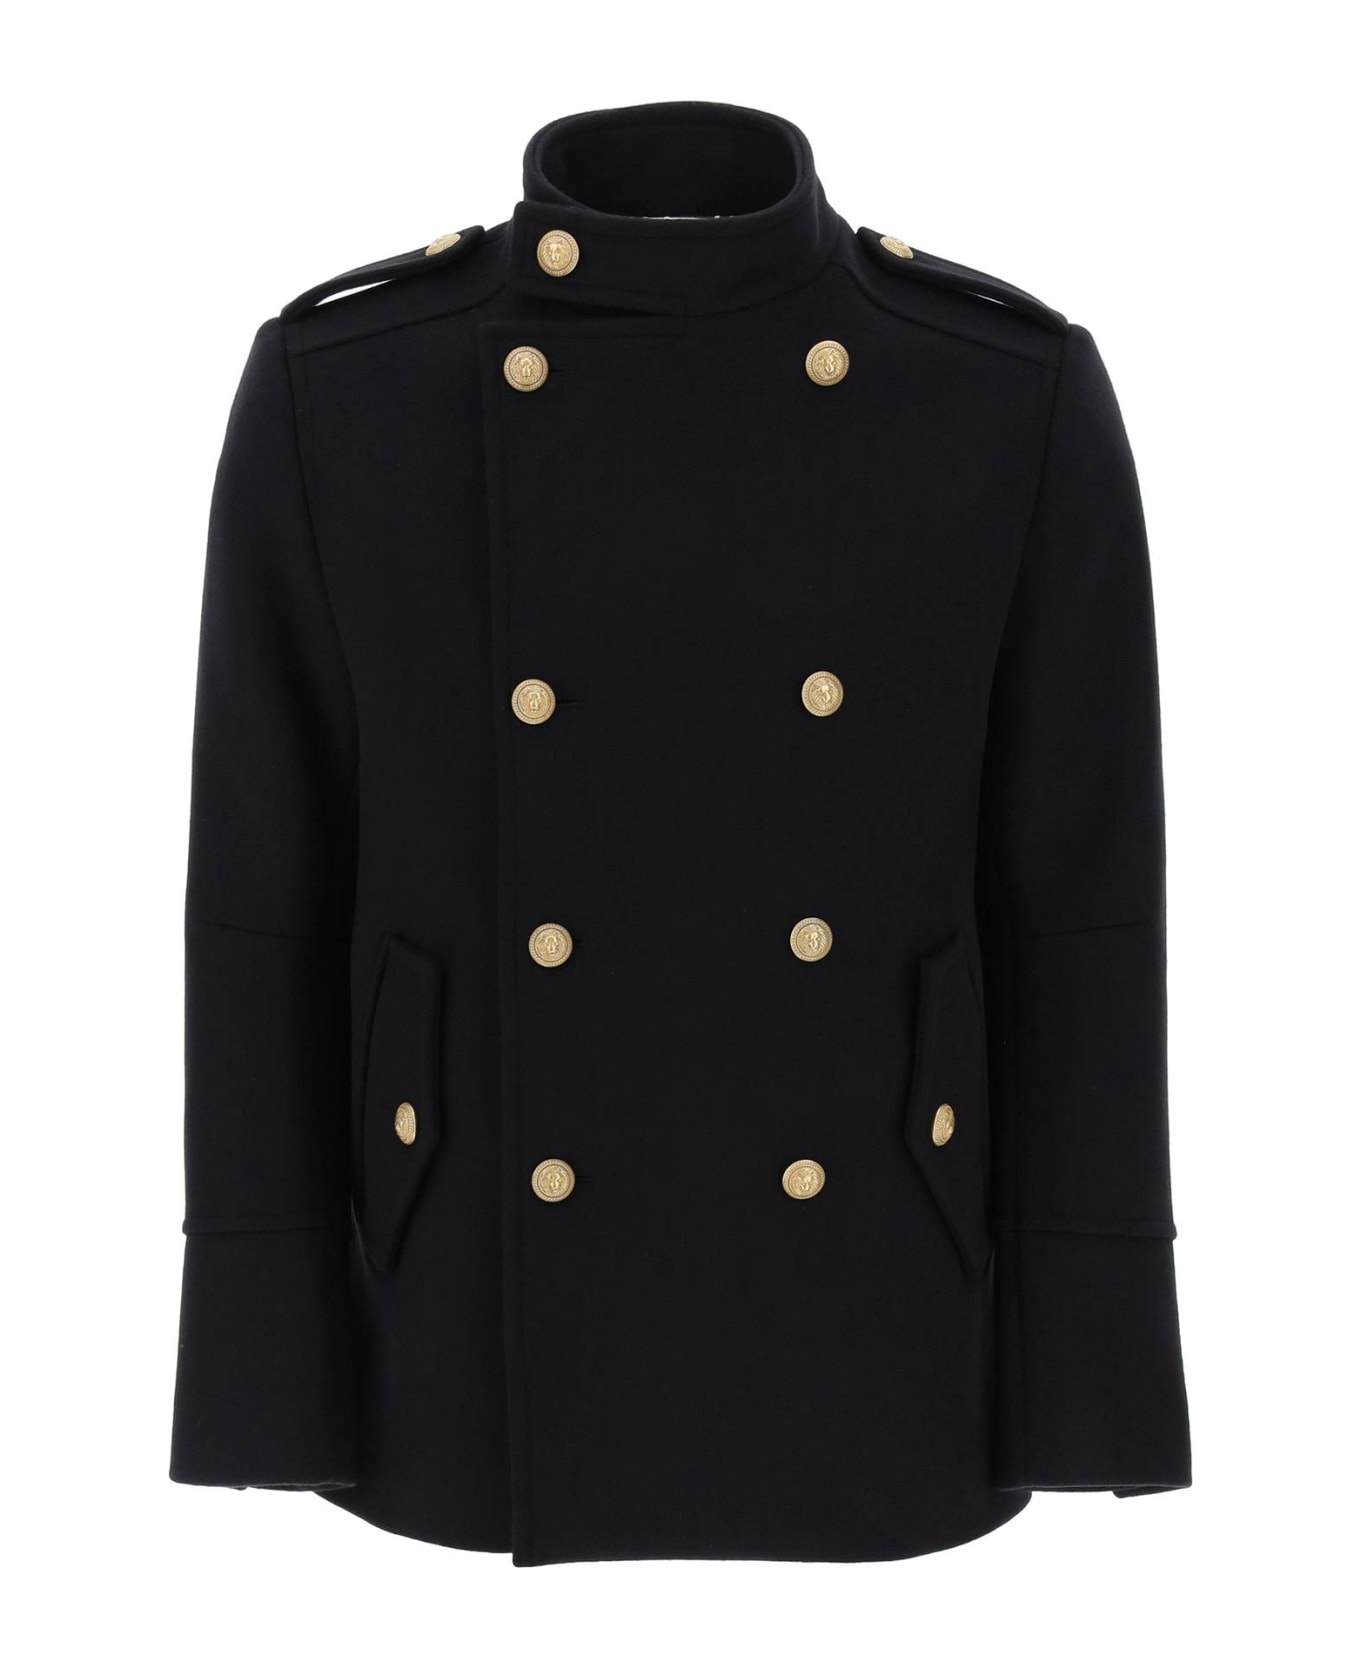 Balmain Double-breasted Peacoat With Embossed Buttons - Black